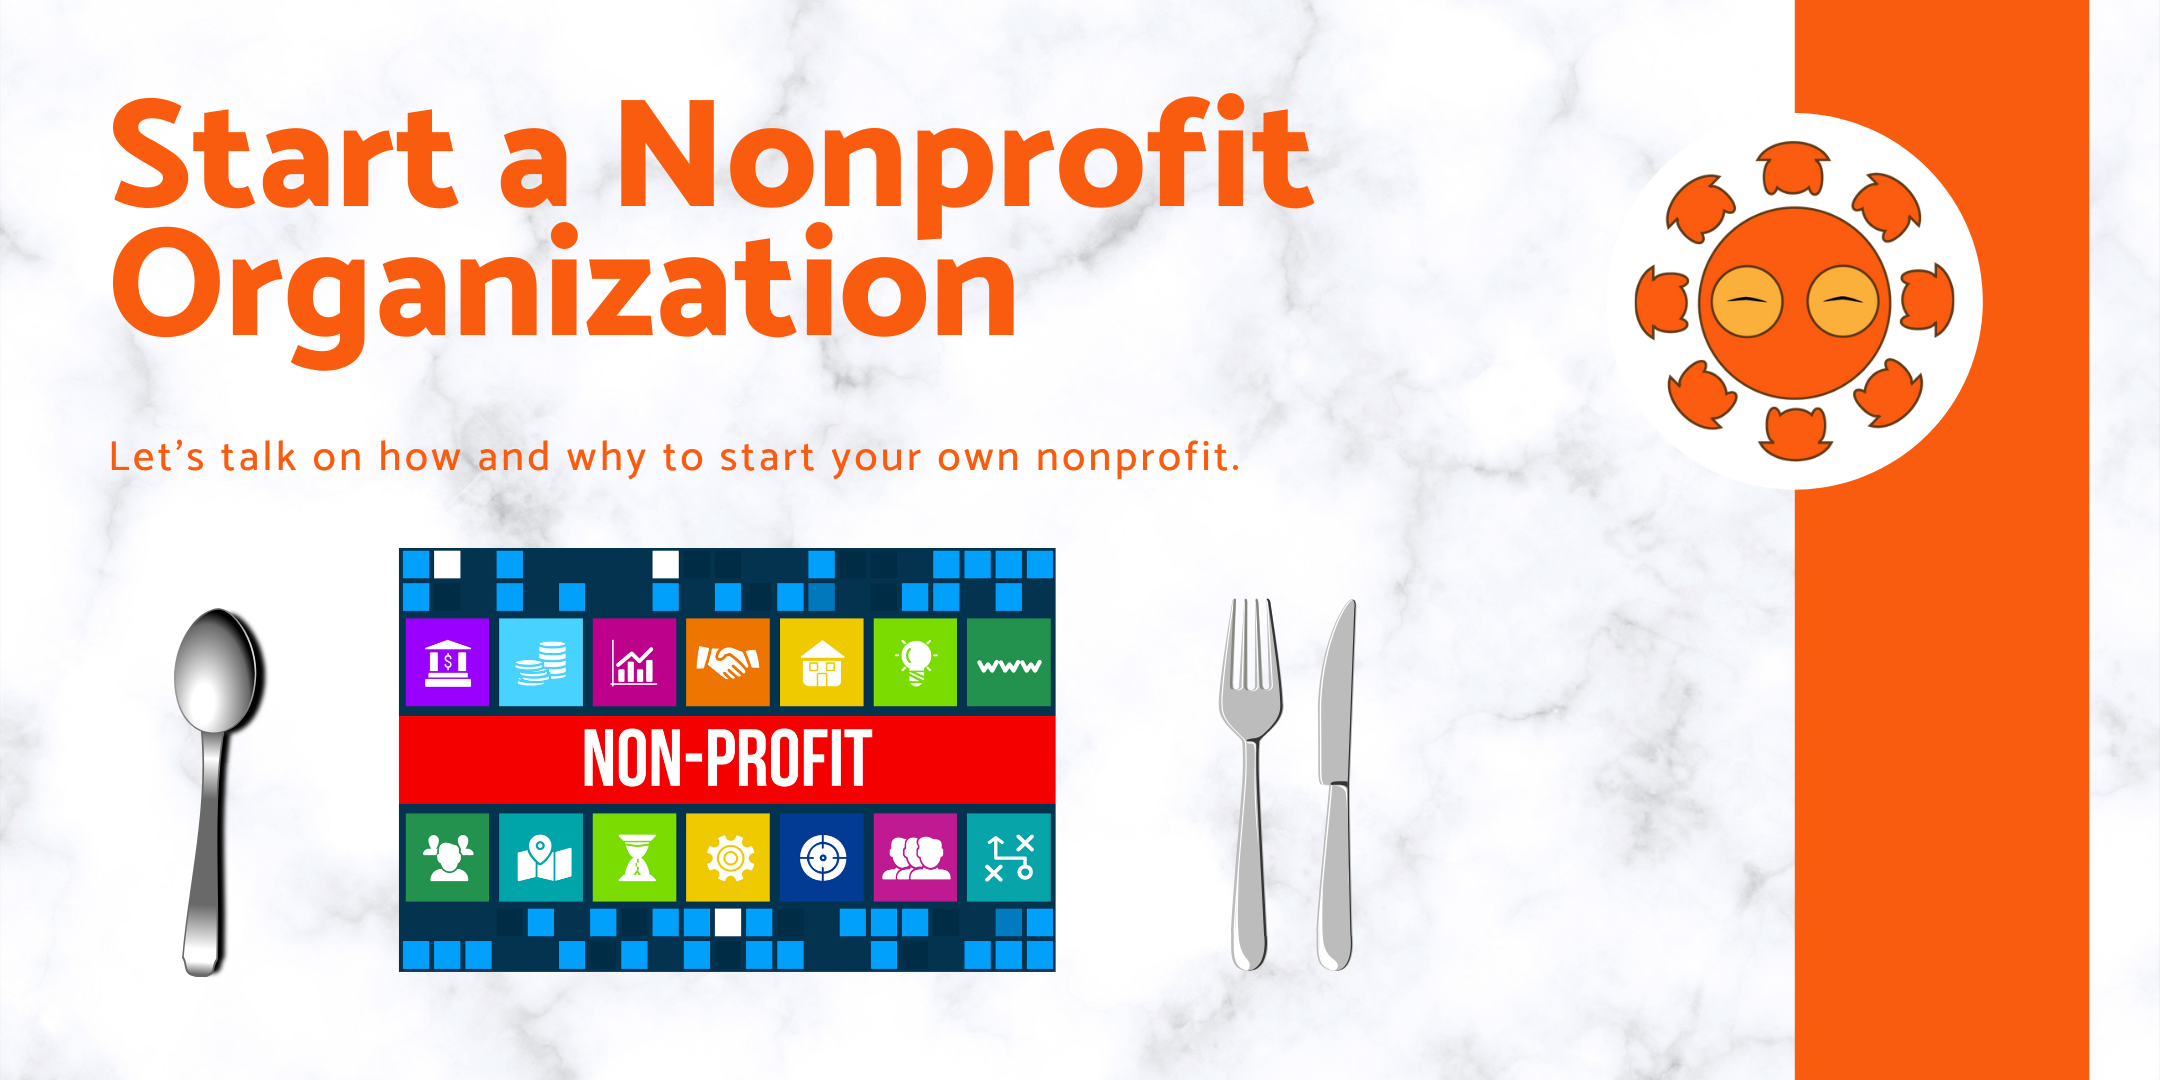 Start a Nonprofit Organization! Oh and get some Food.